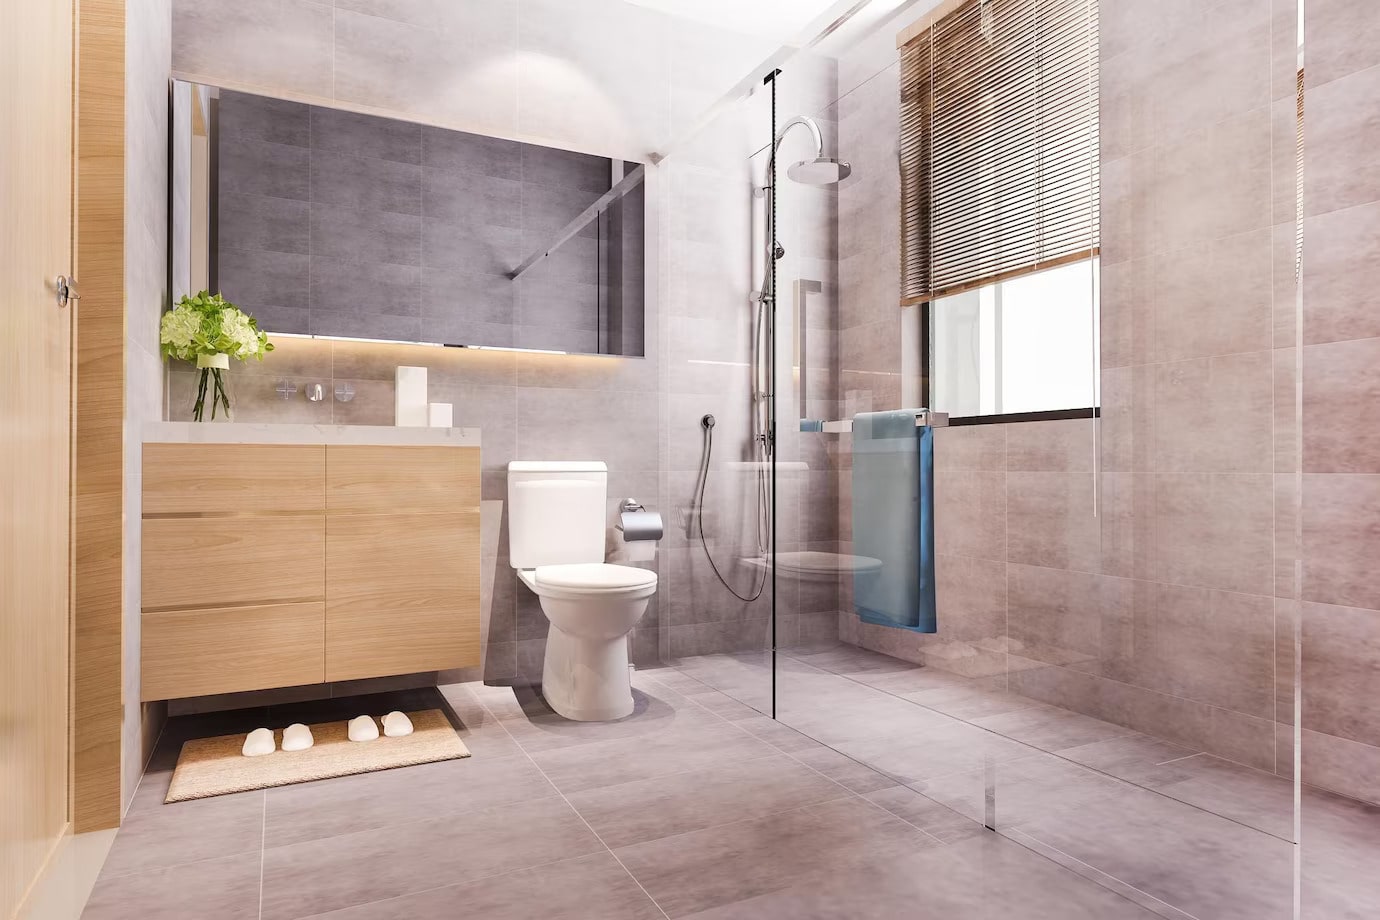 Bathroom Remodeling Ideas for a Modern and Functional Space